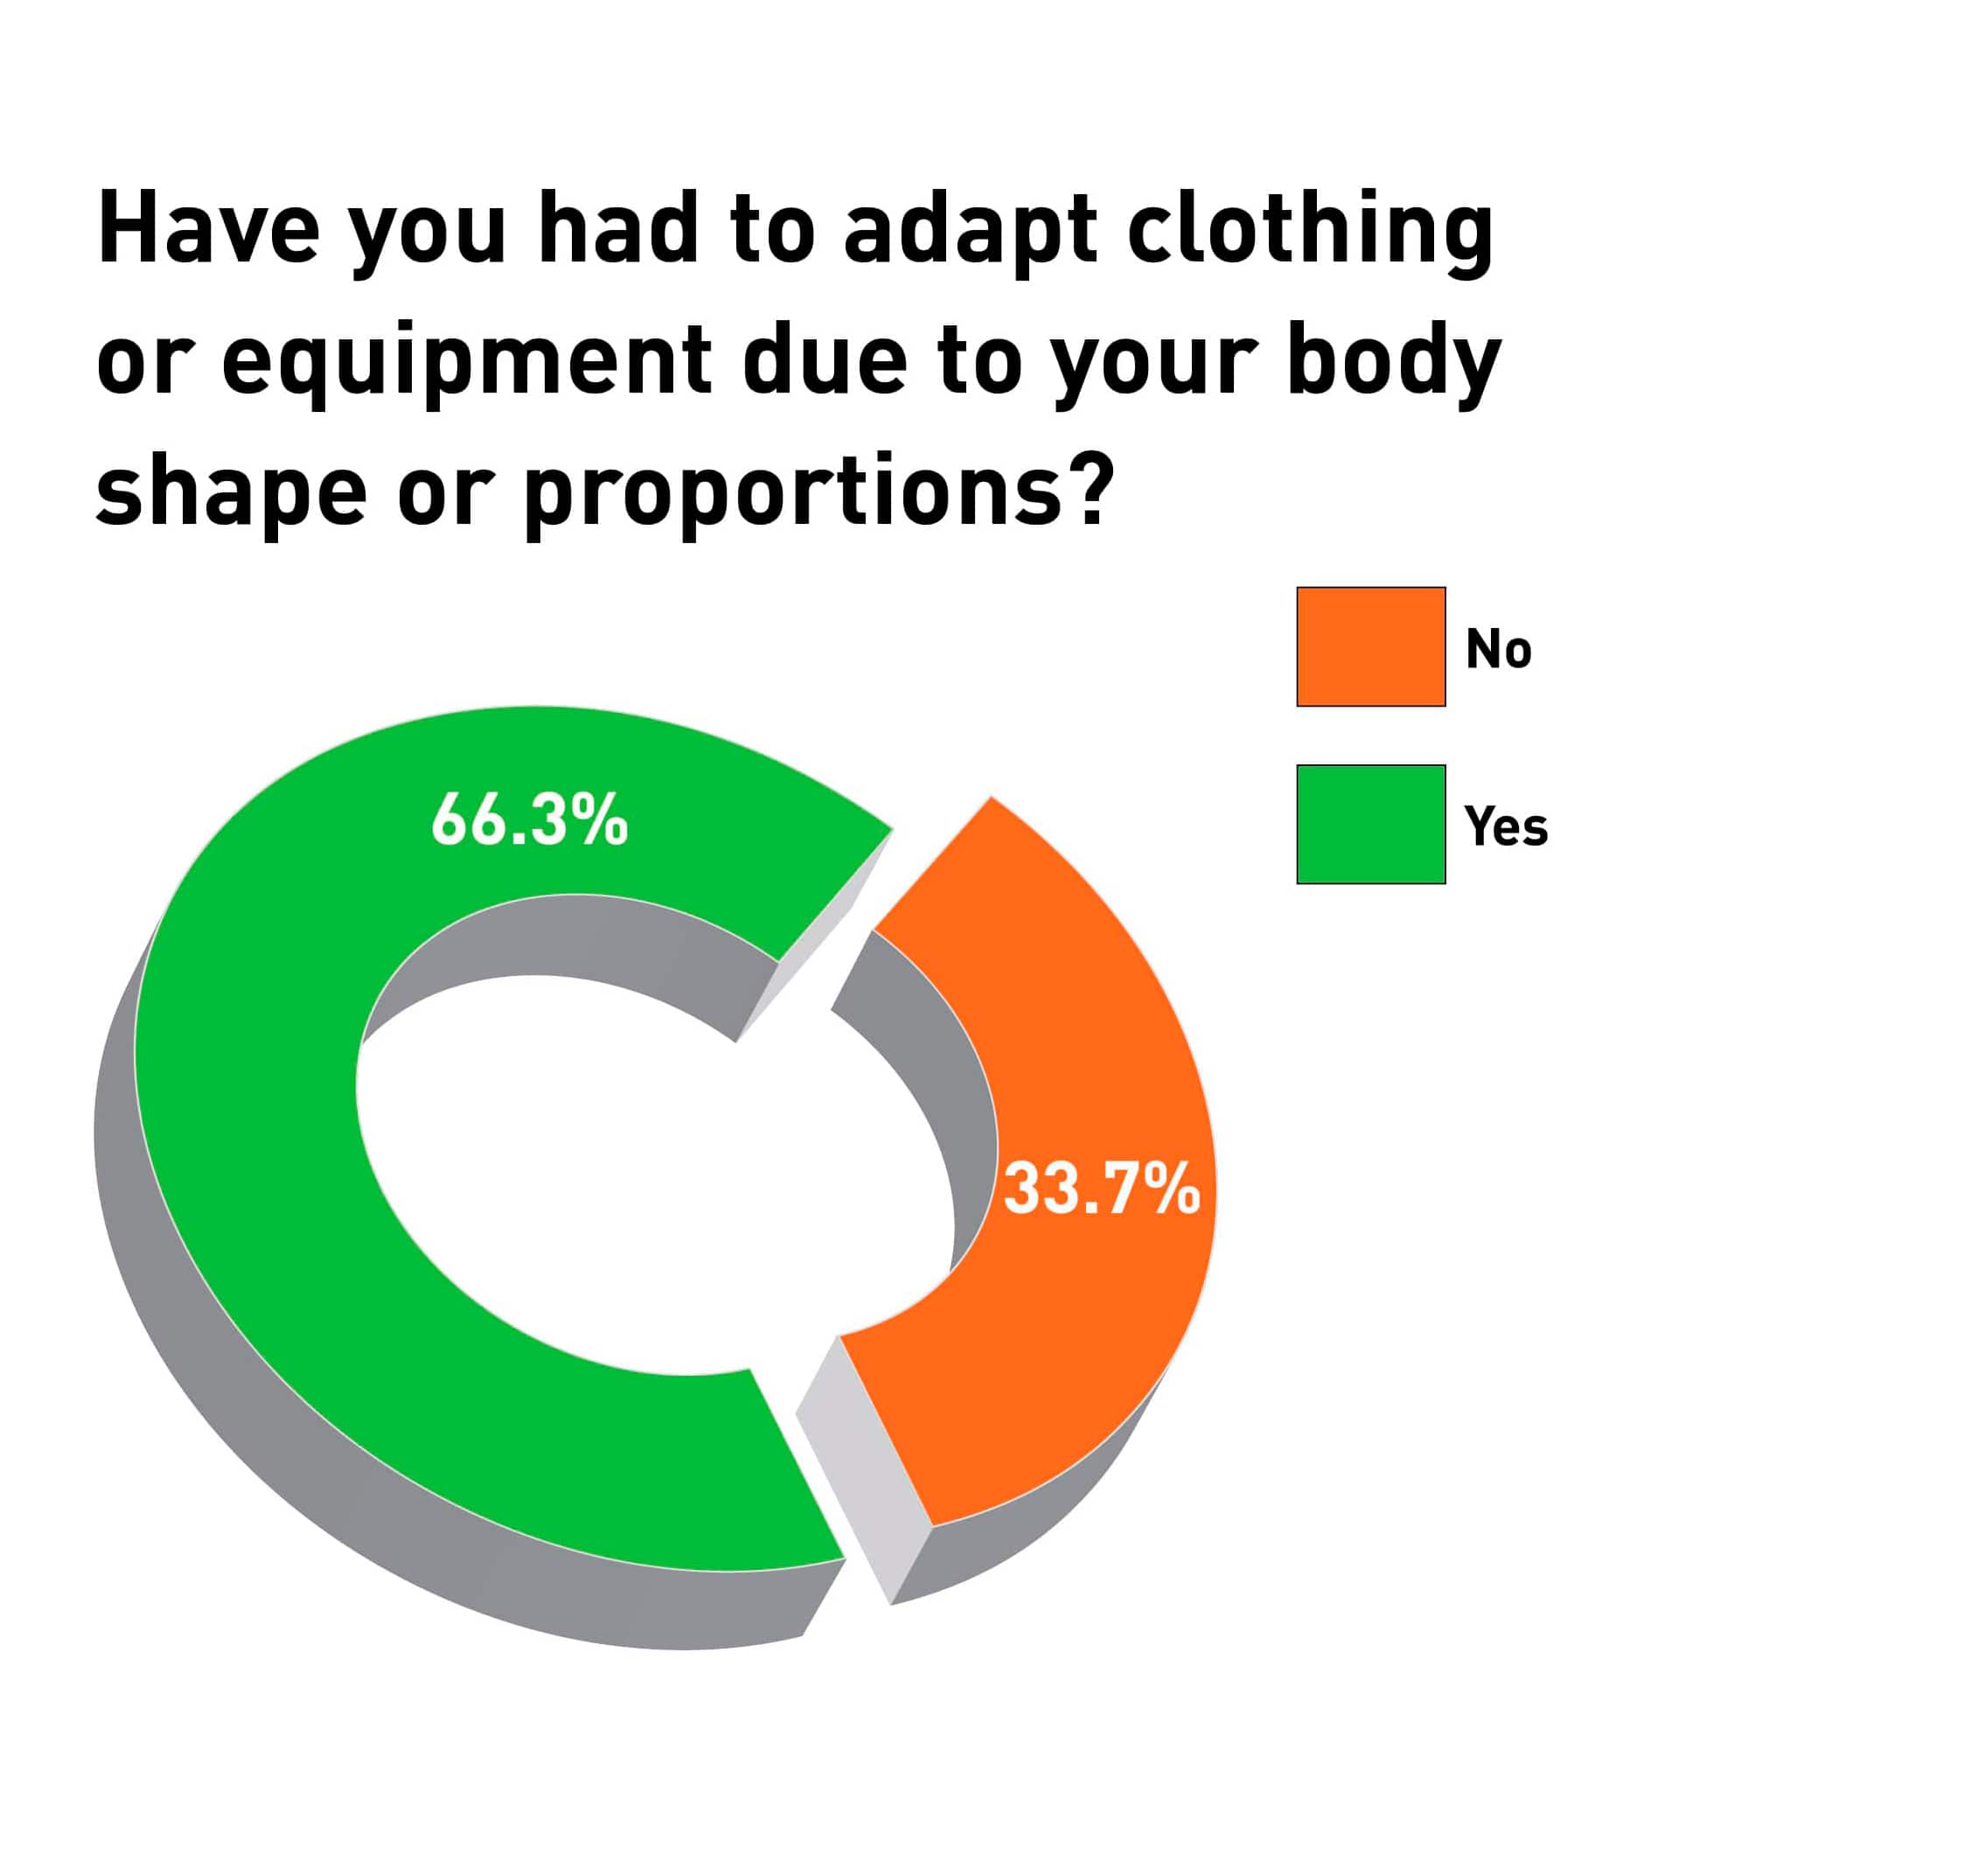 Have you ever had to adapt clothing or equipment?